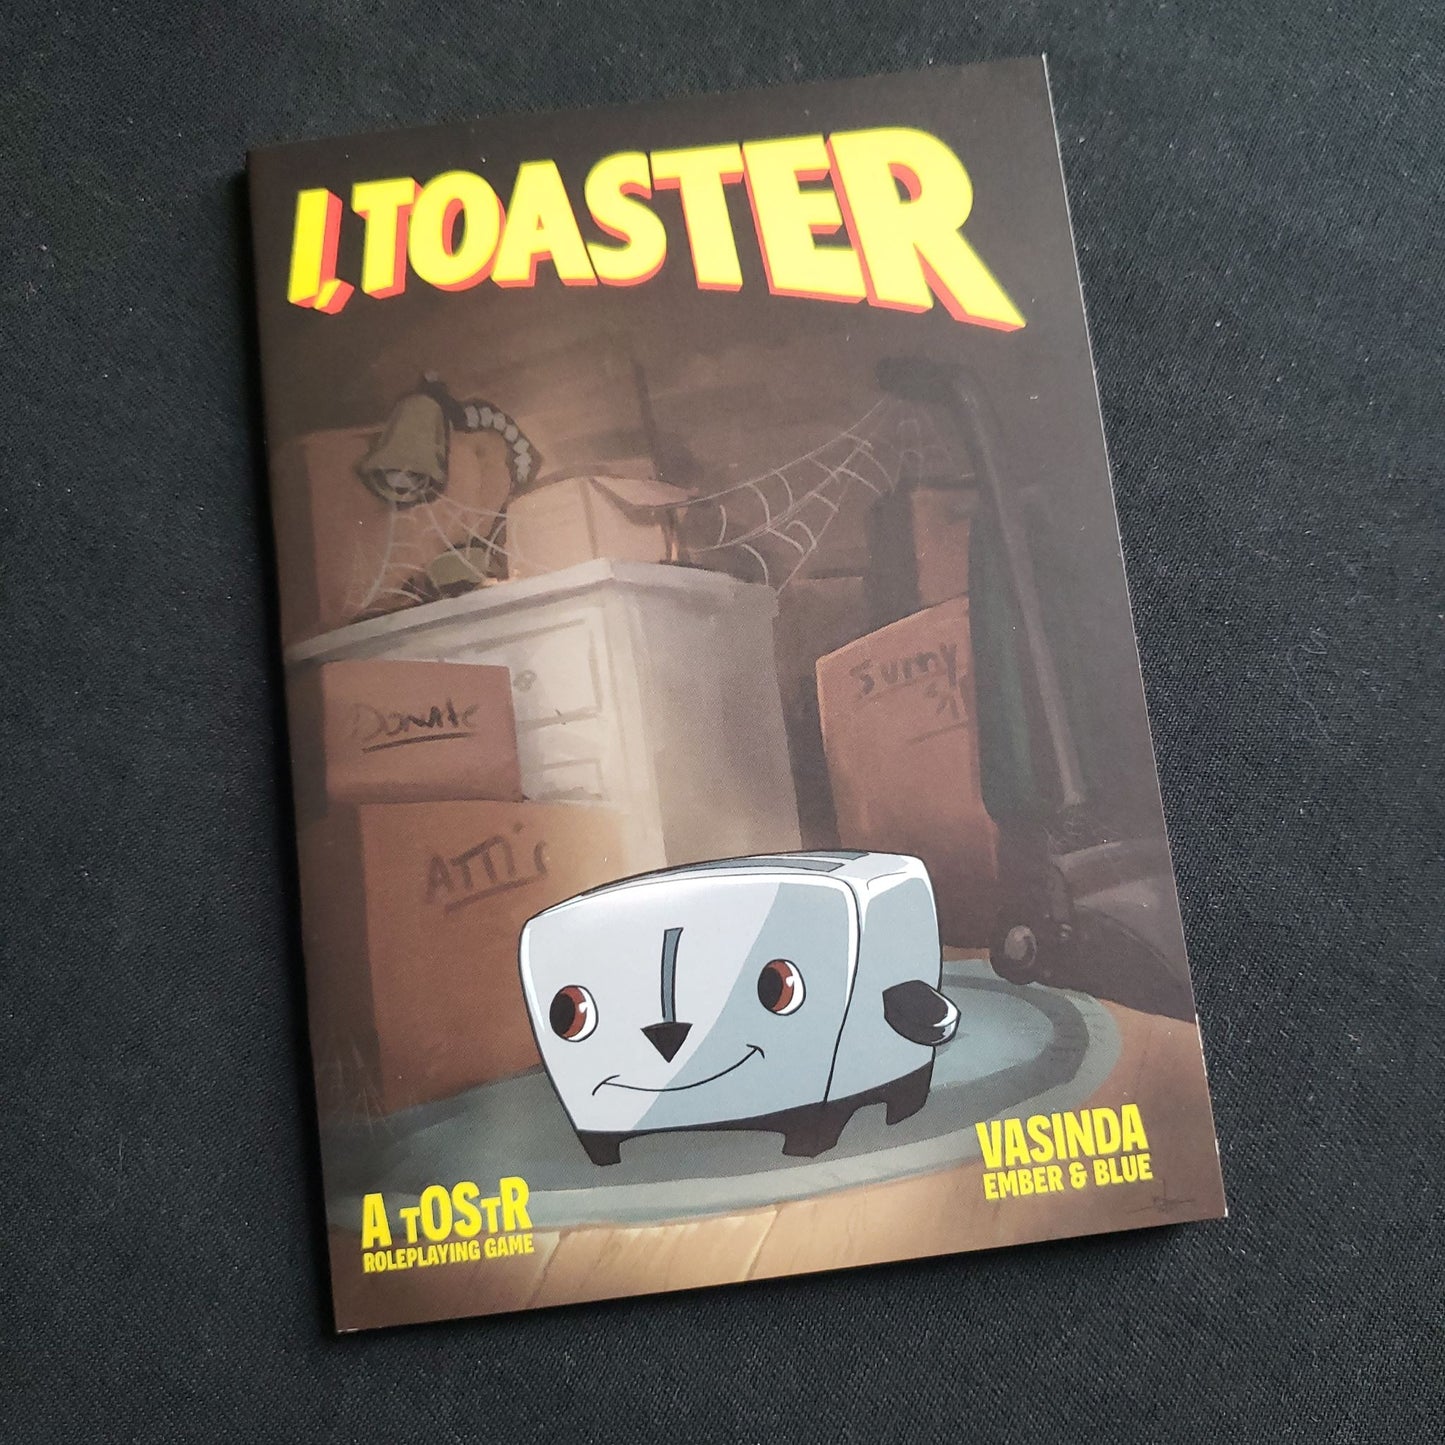 Image shows the front cover of the I, Toaster roleplaying game book